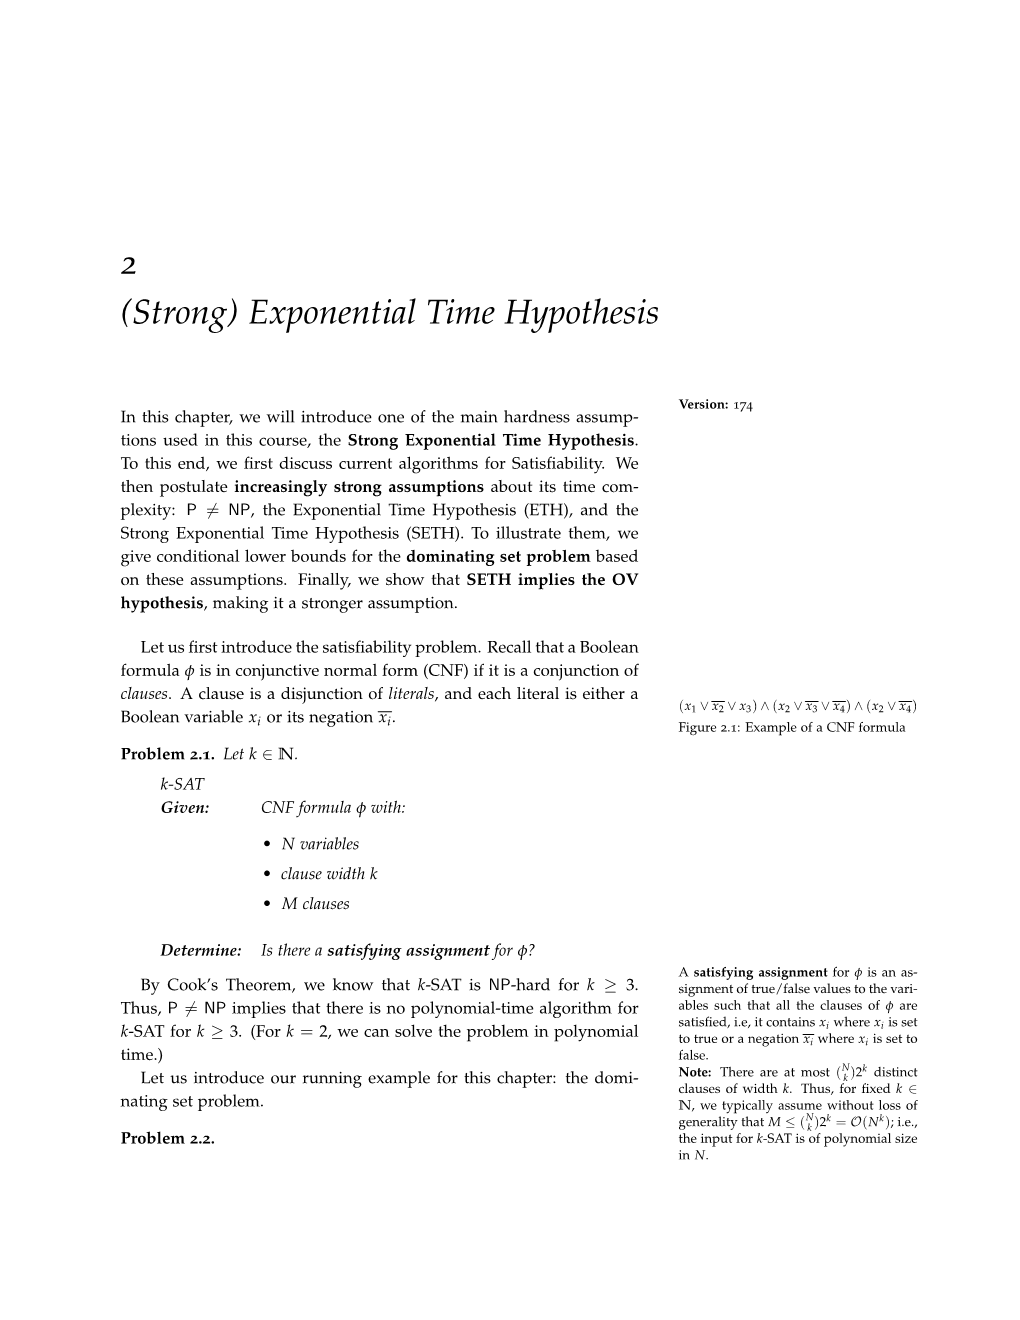 2 (Strong) Exponential Time Hypothesis